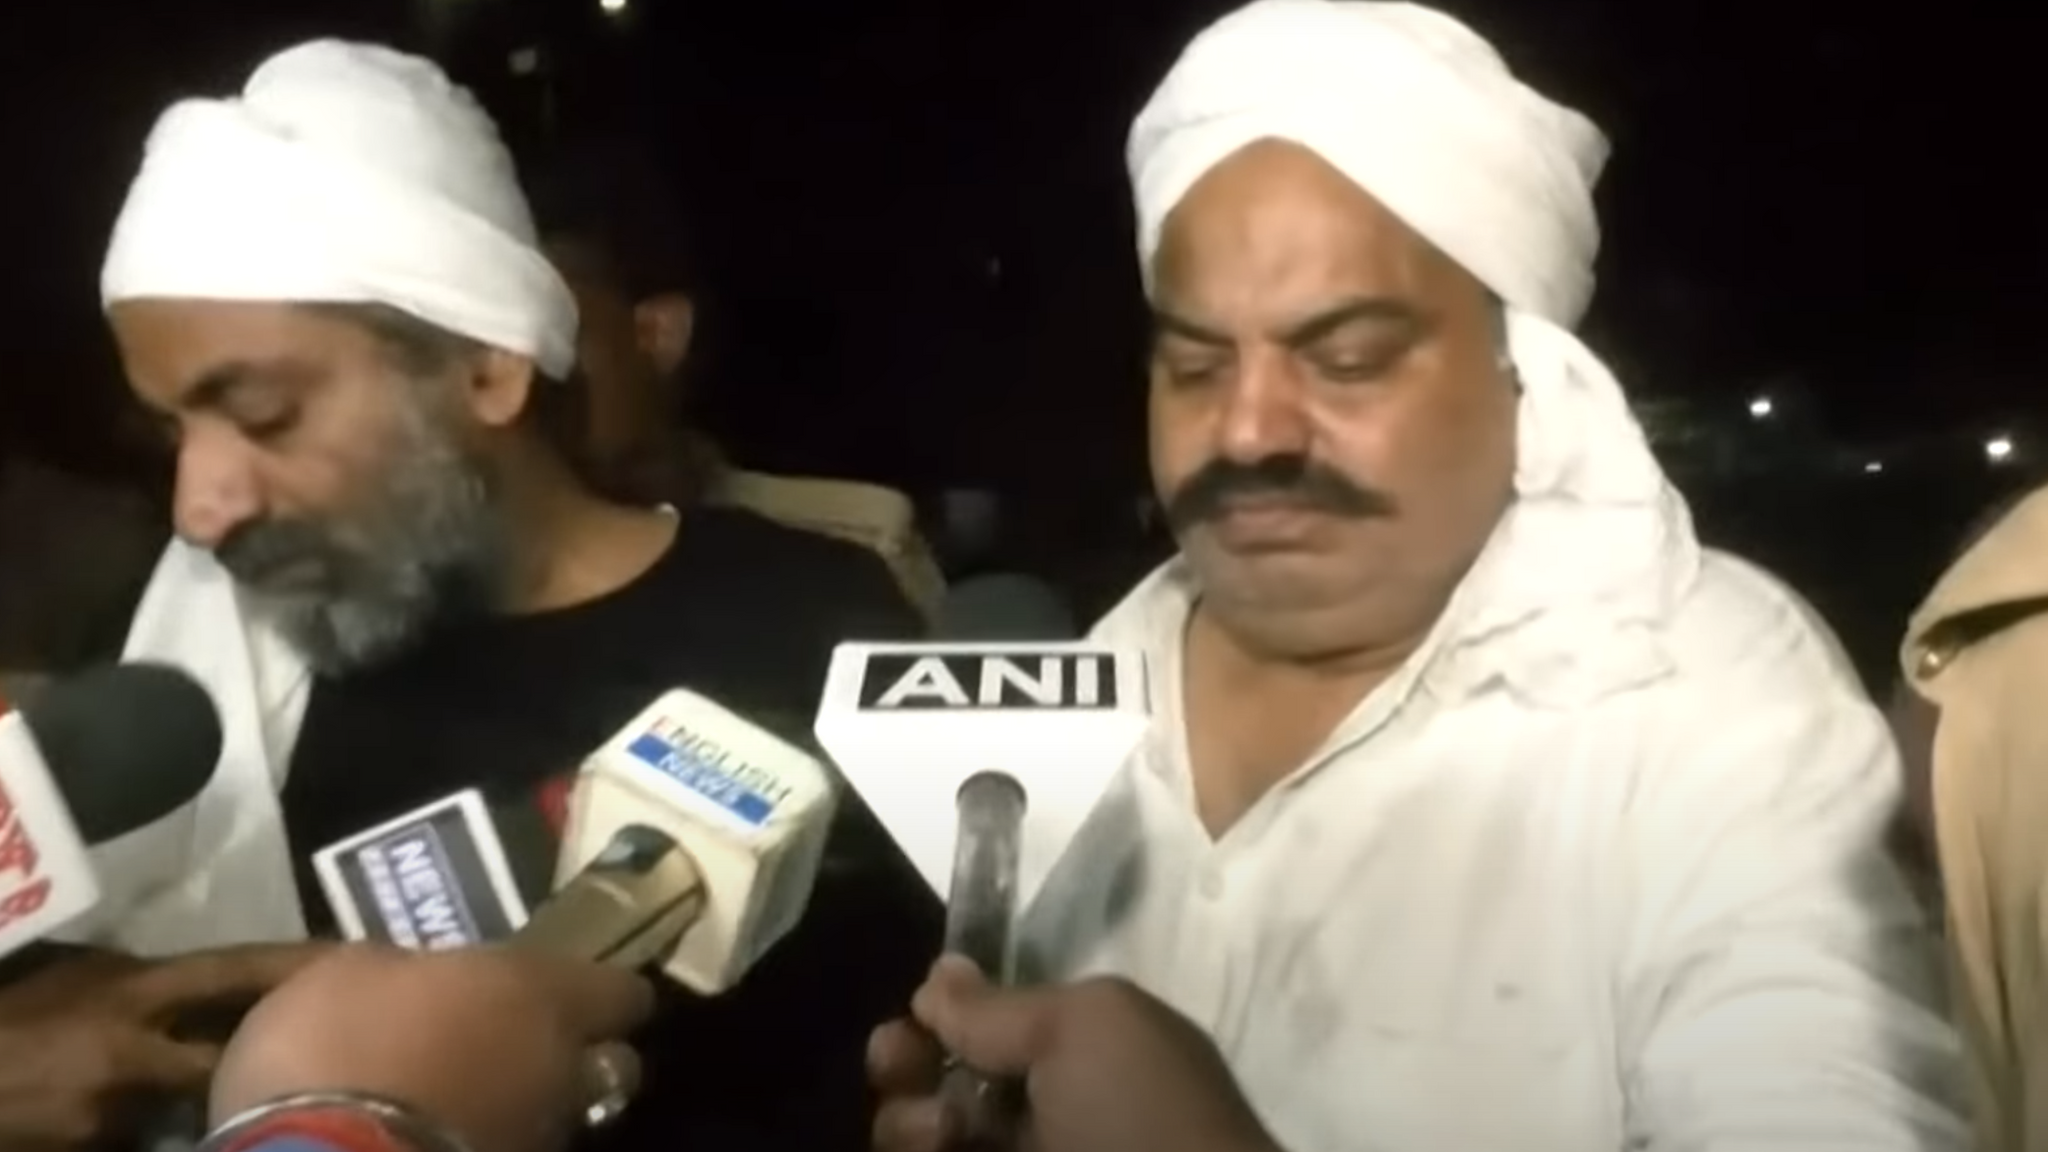 Former Indian MP and brother shot dead live on TV